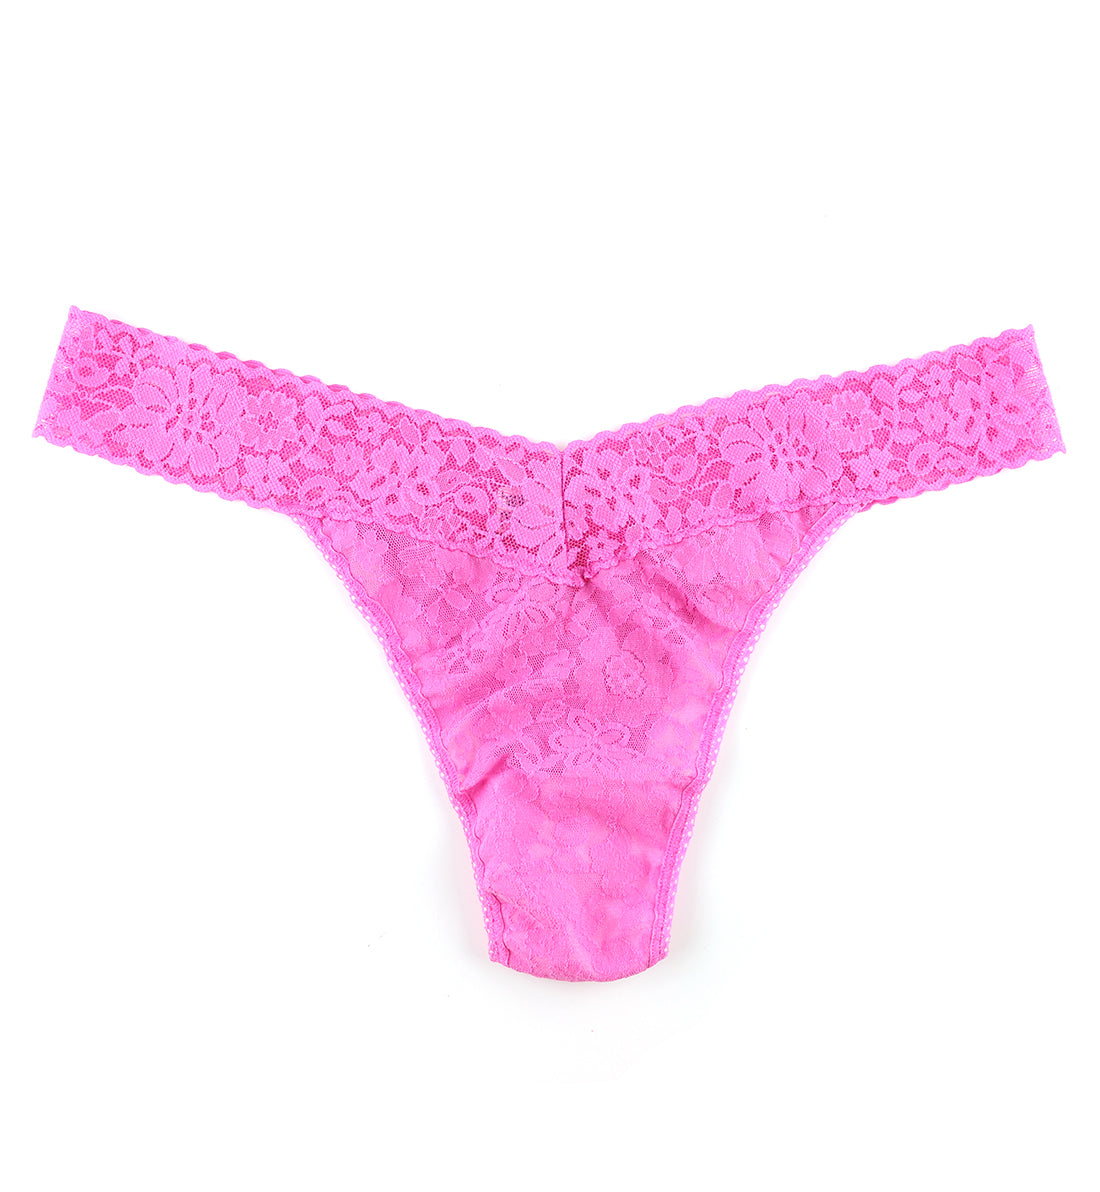 Hanky Panky Daily Lace Original Rise Thong PLUS (771101XP),Dream House Pink - Dream House Pink,One Size